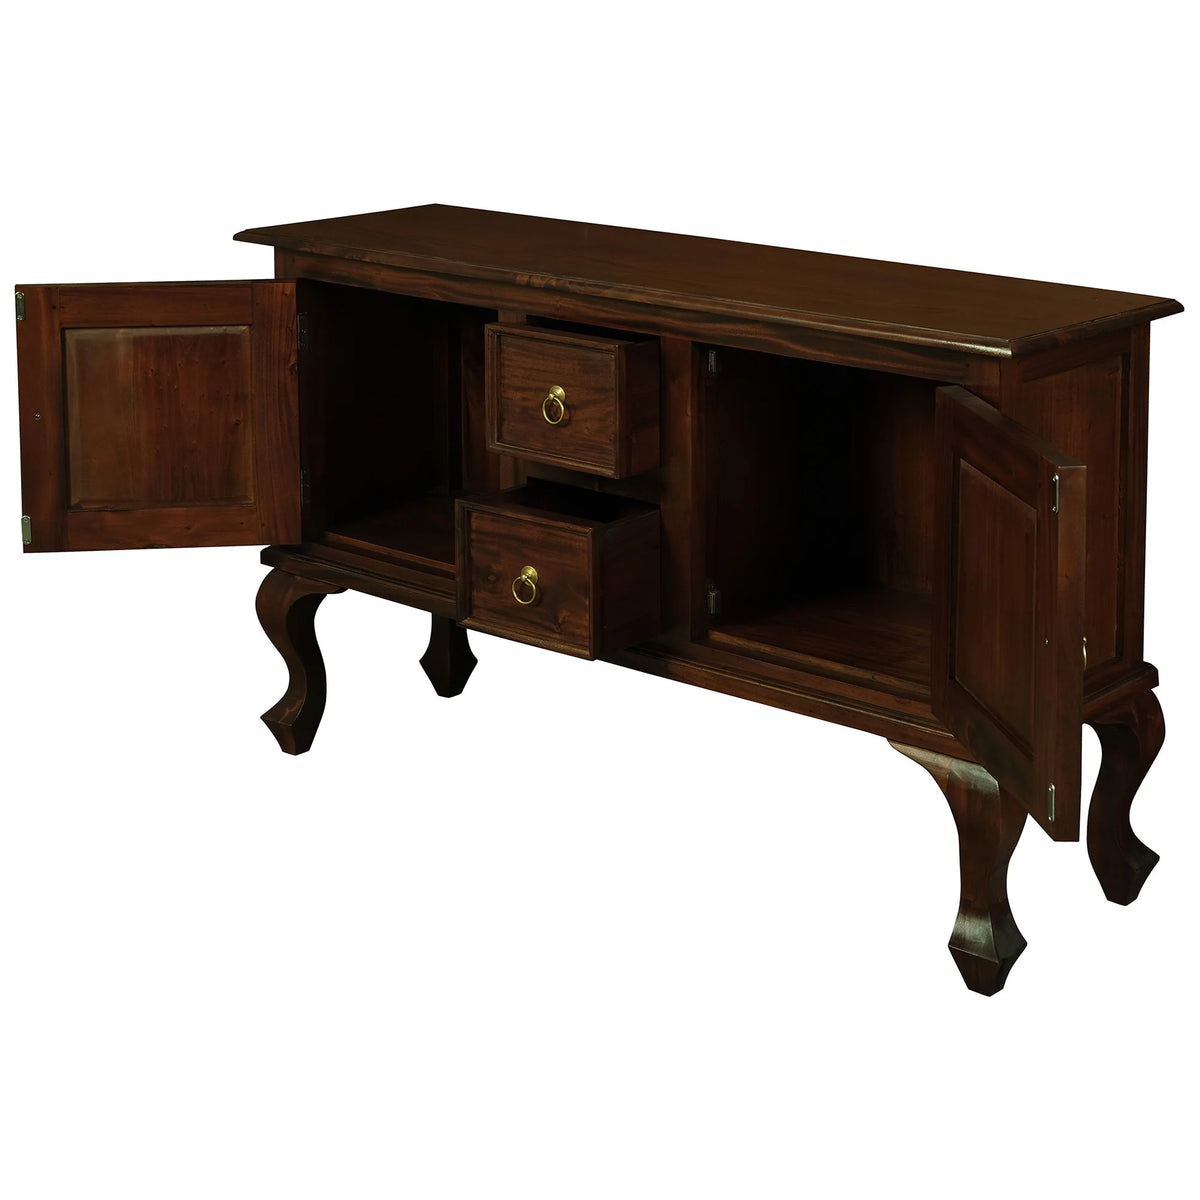 Queen Anne Timber 2 Door and 2 Drawer Console - Mahogany - Notbrand